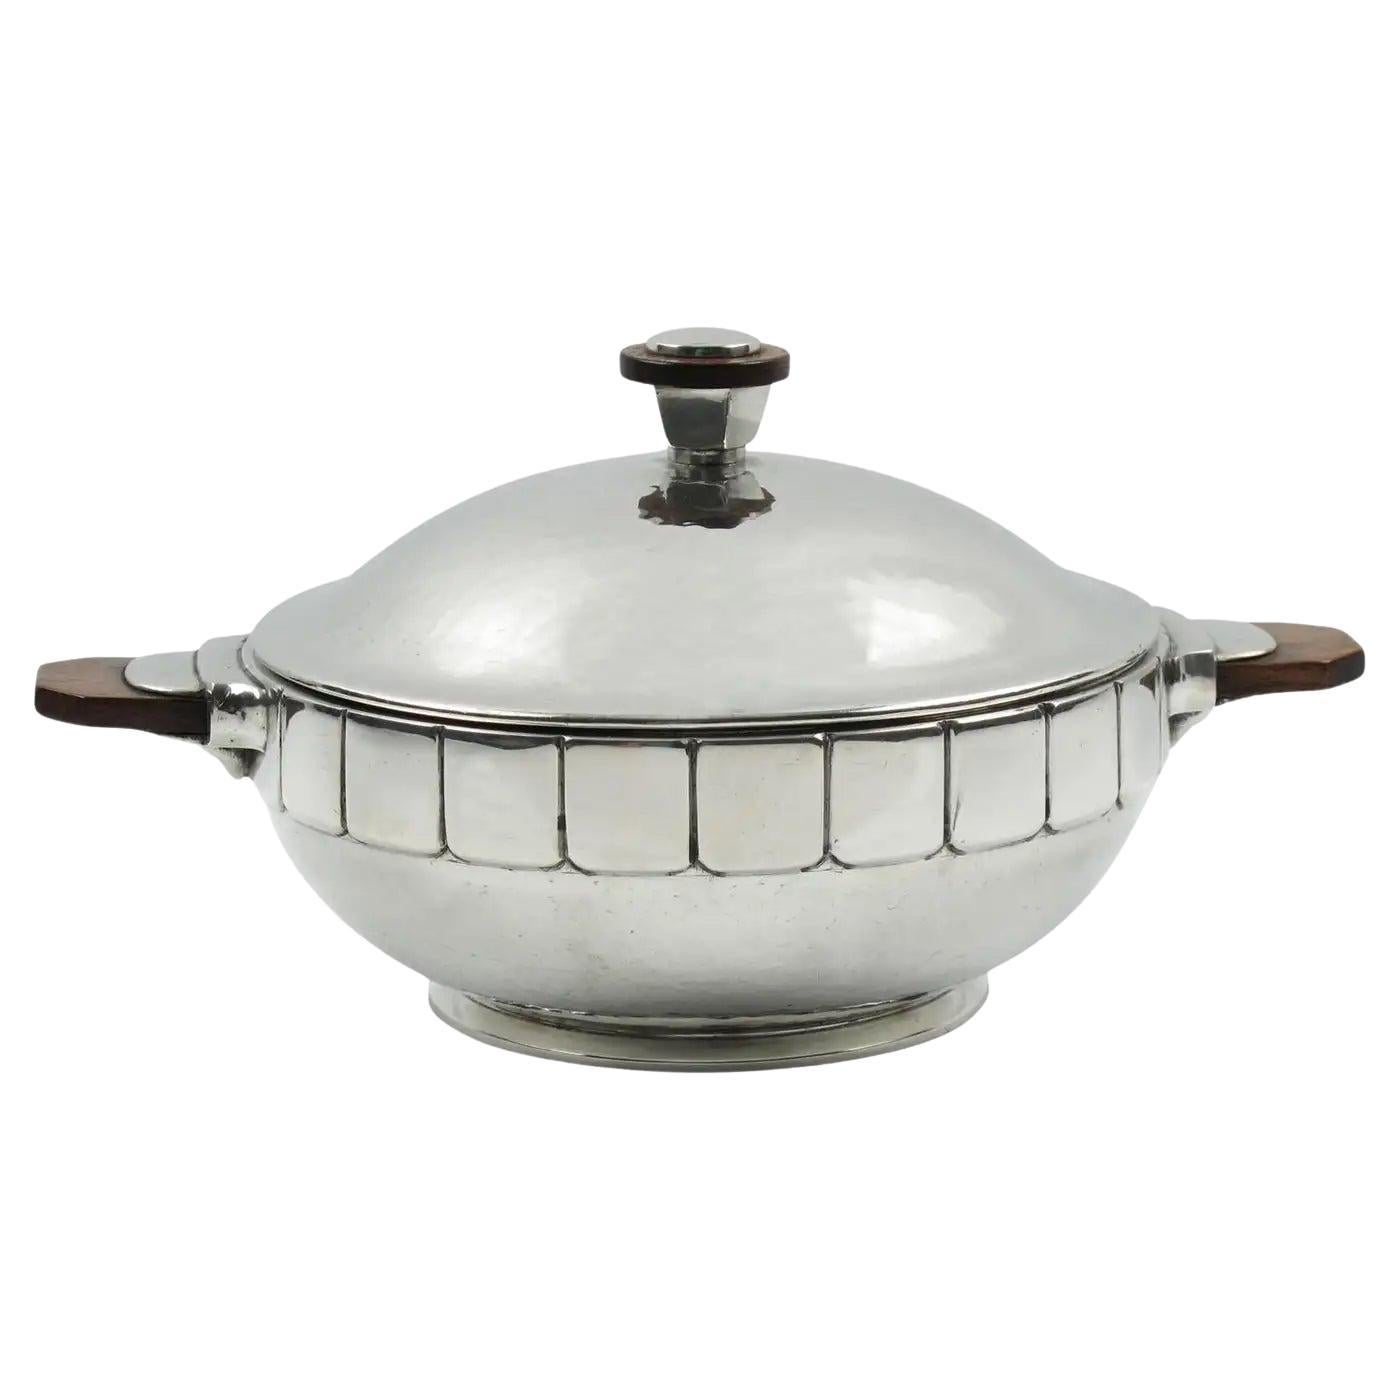 Pewter Tureen Covered Dish Centerpiece by H.J. Geneve, 1940s For Sale